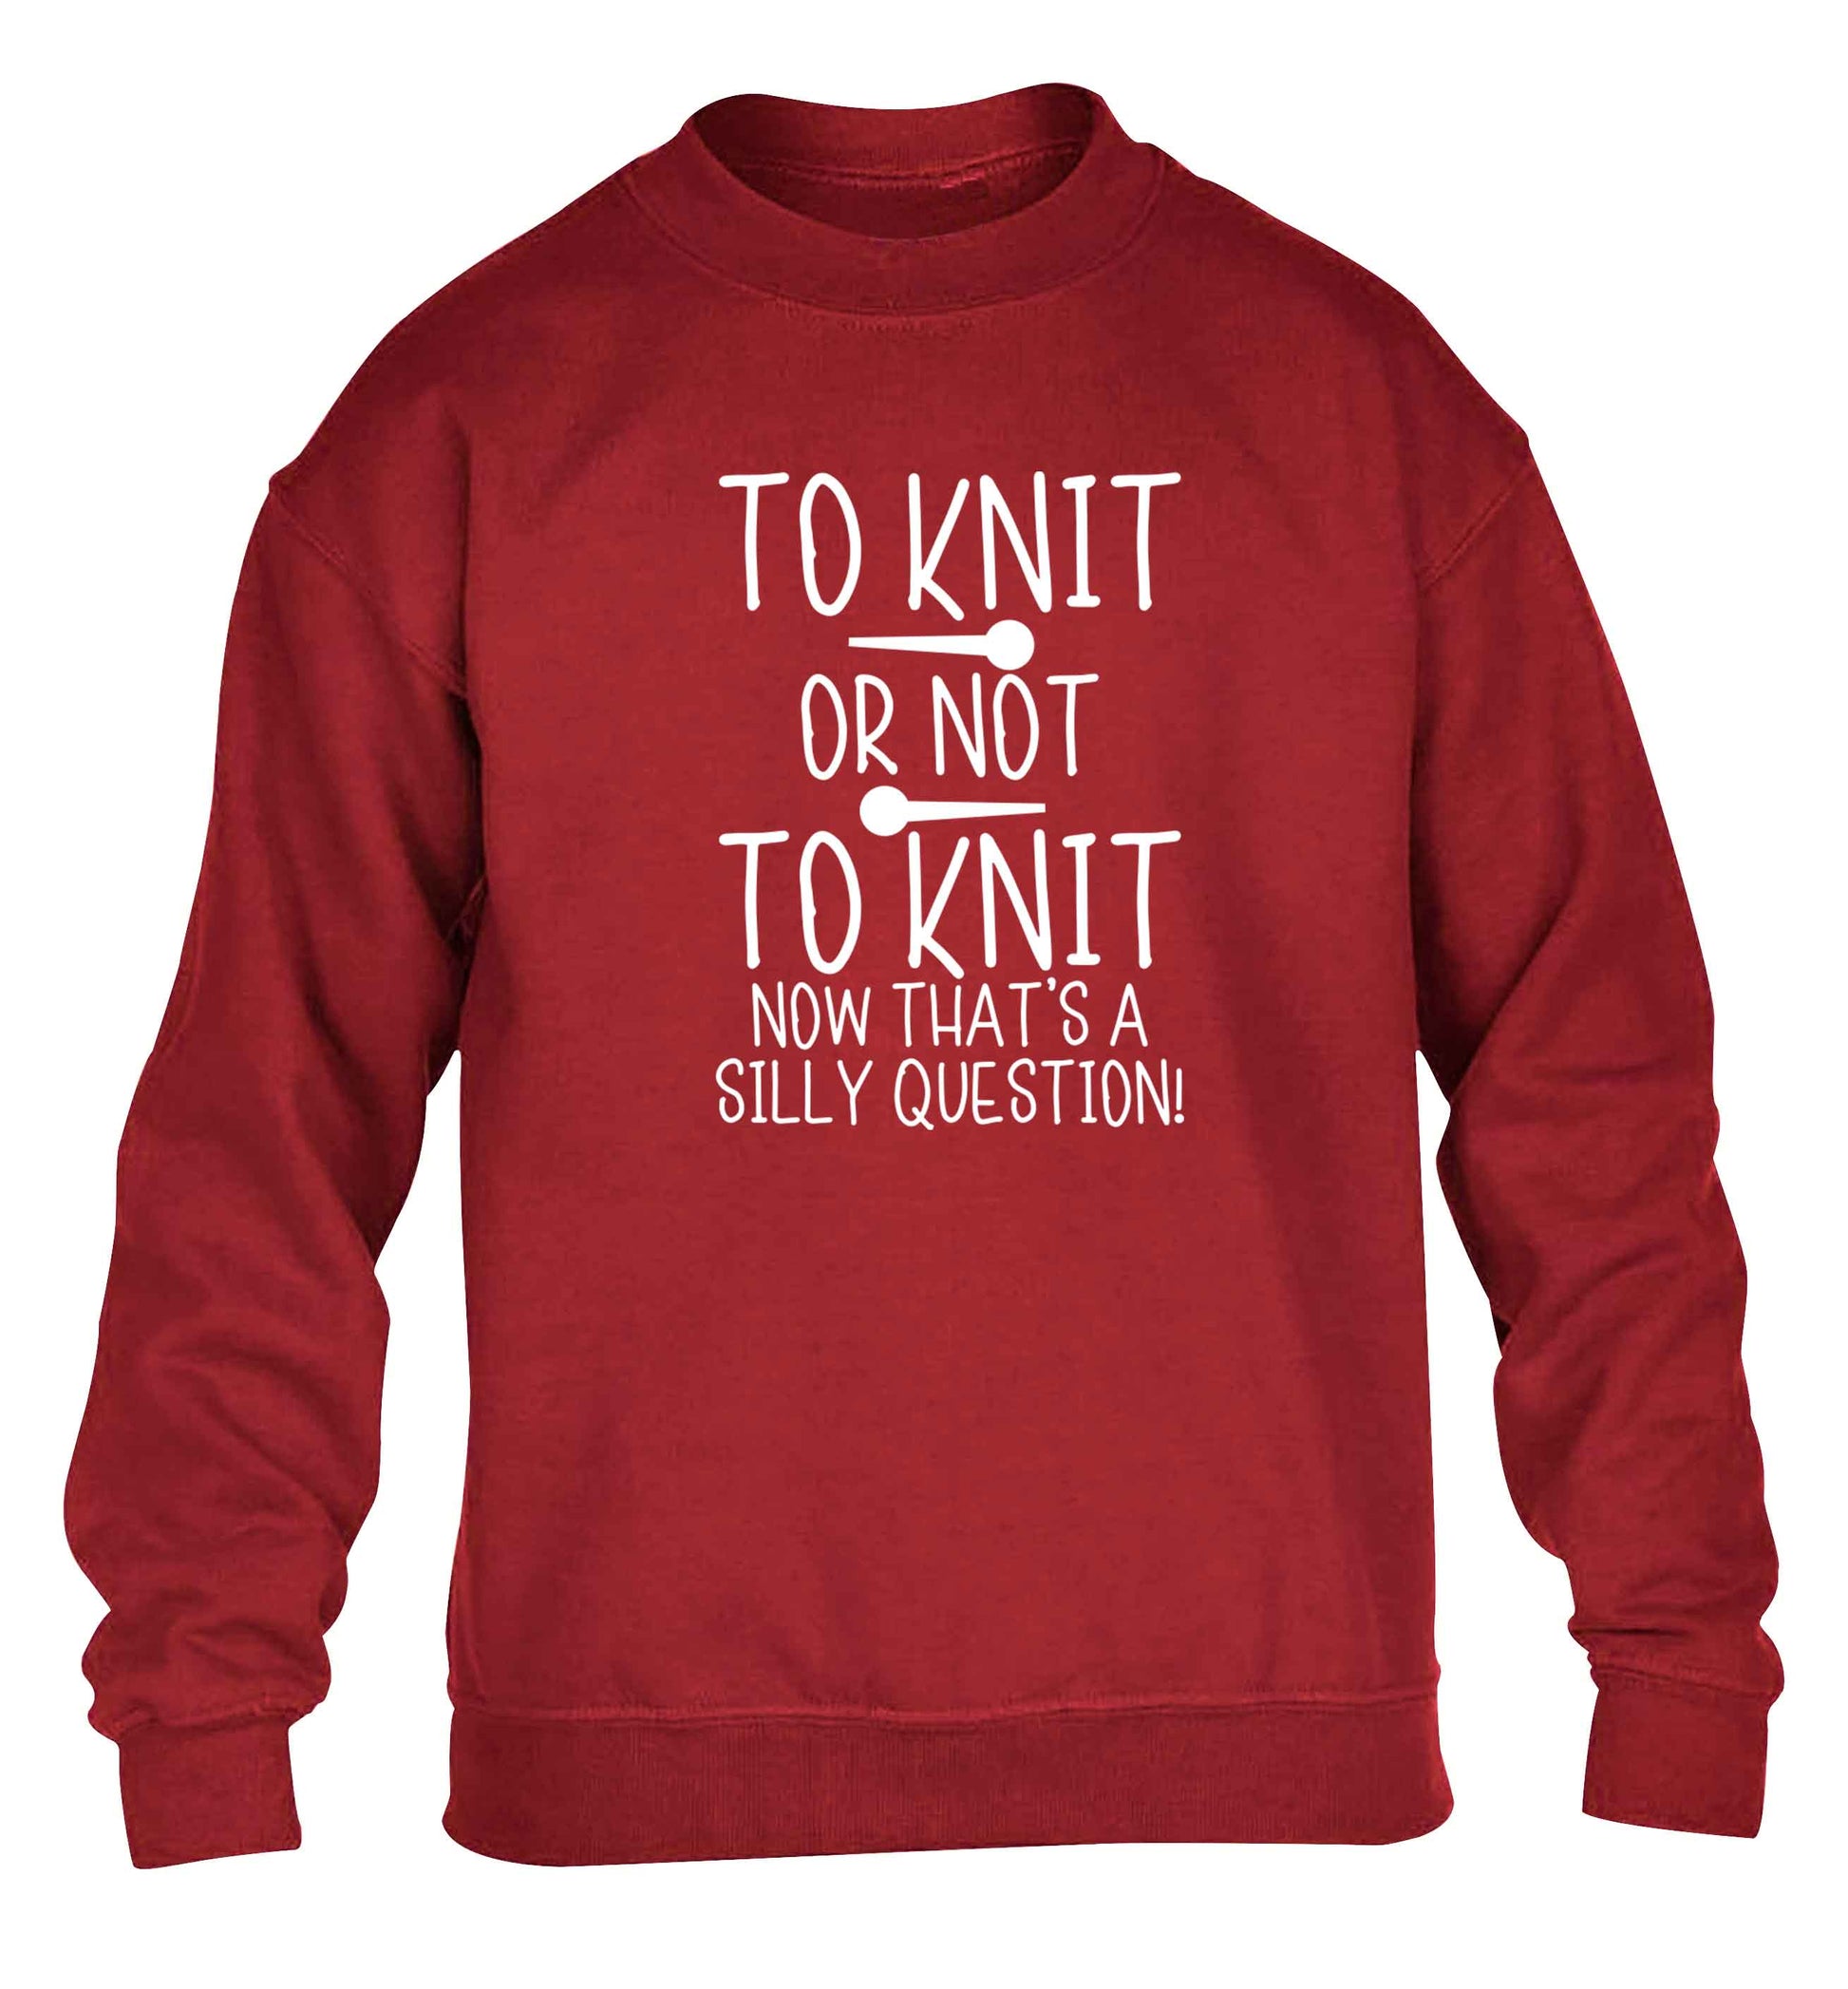 To knit or not to knit now that's a silly question children's grey sweater 12-13 Years